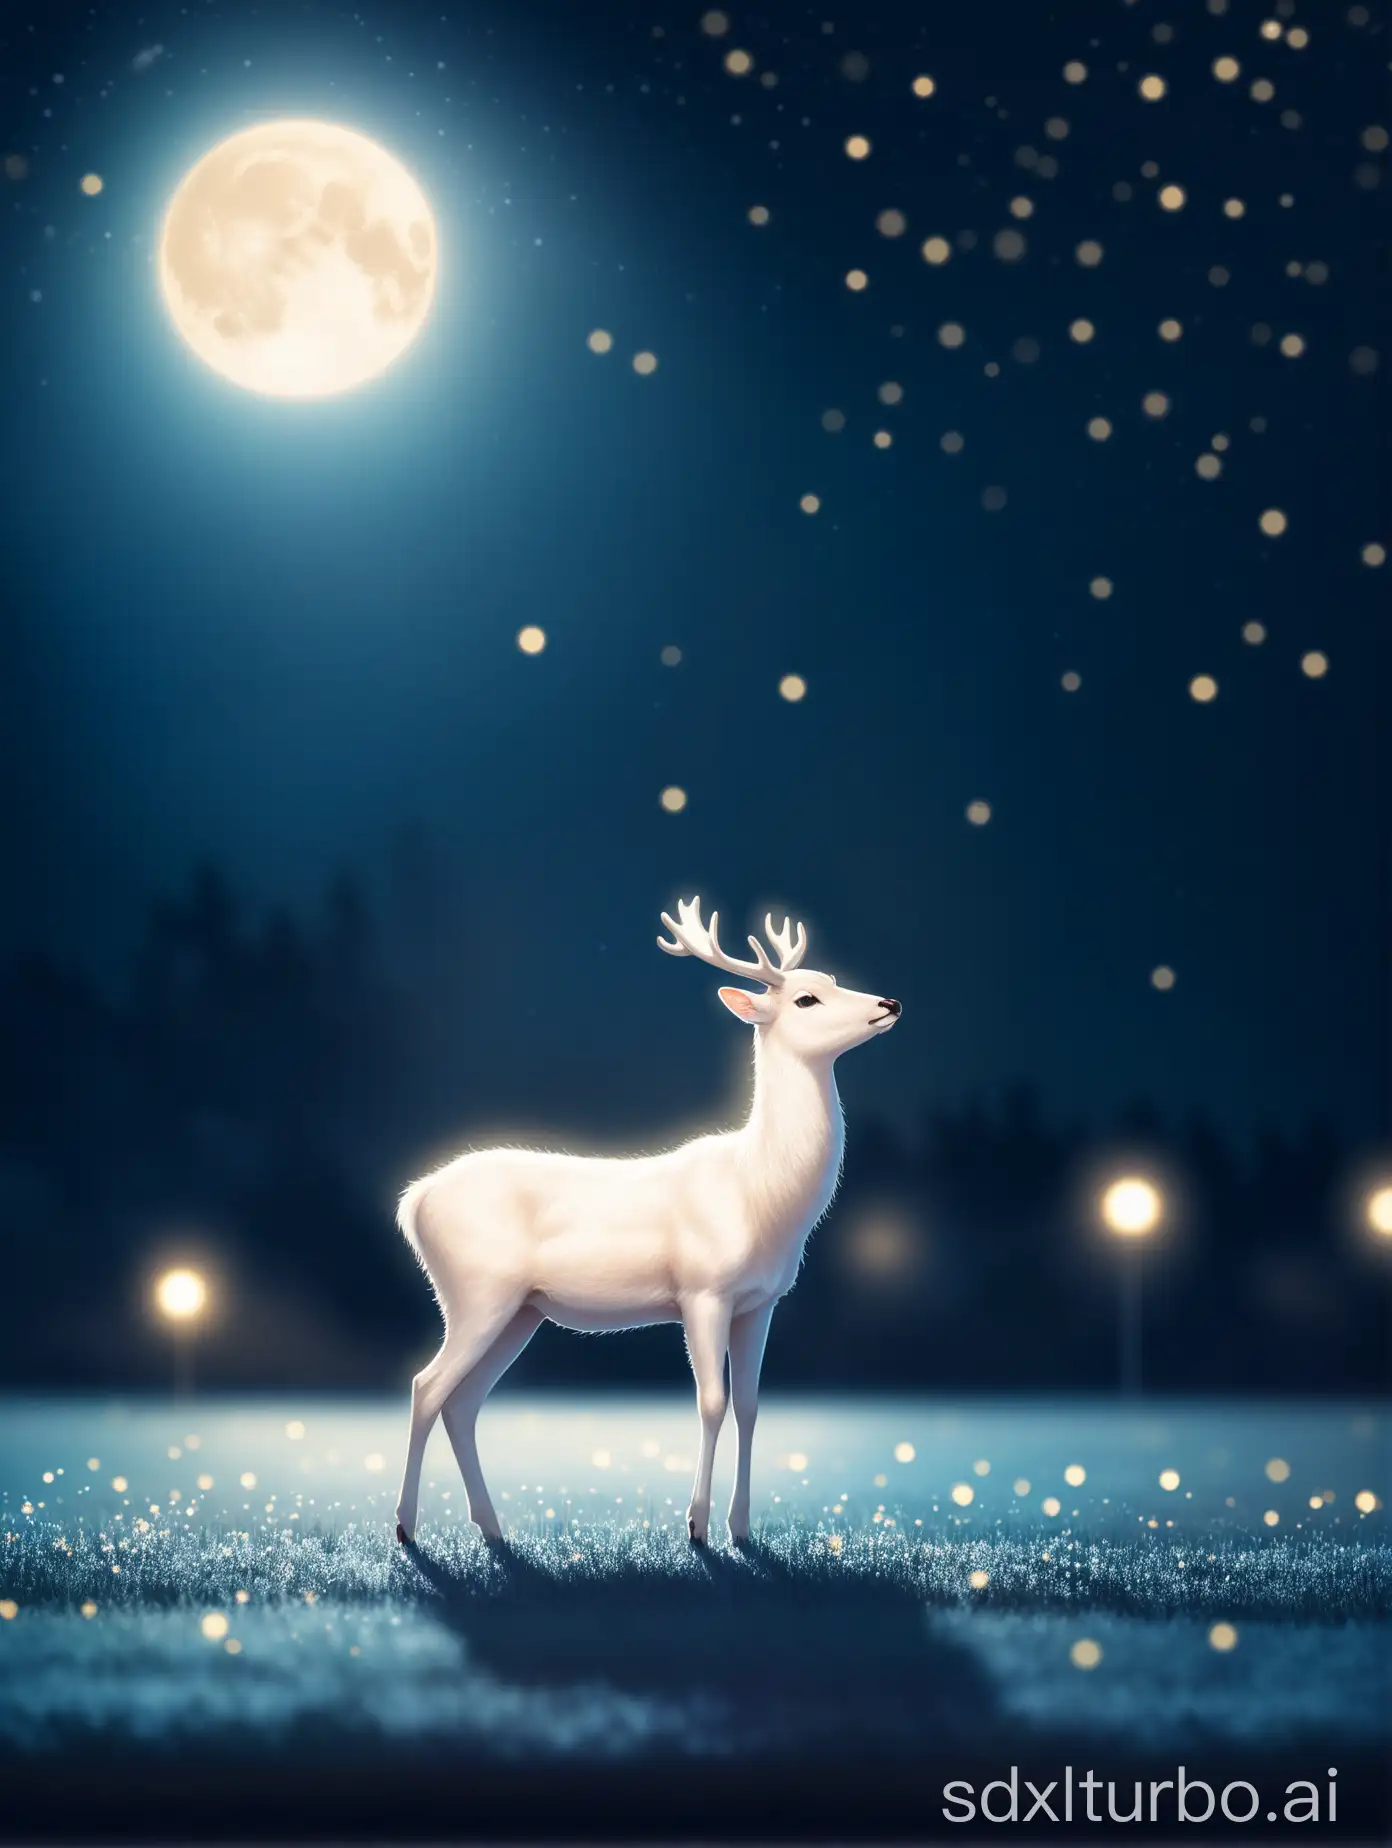 The dreamy and beautiful image of a white deer under the moonlight captured by a tilt-shift lens.